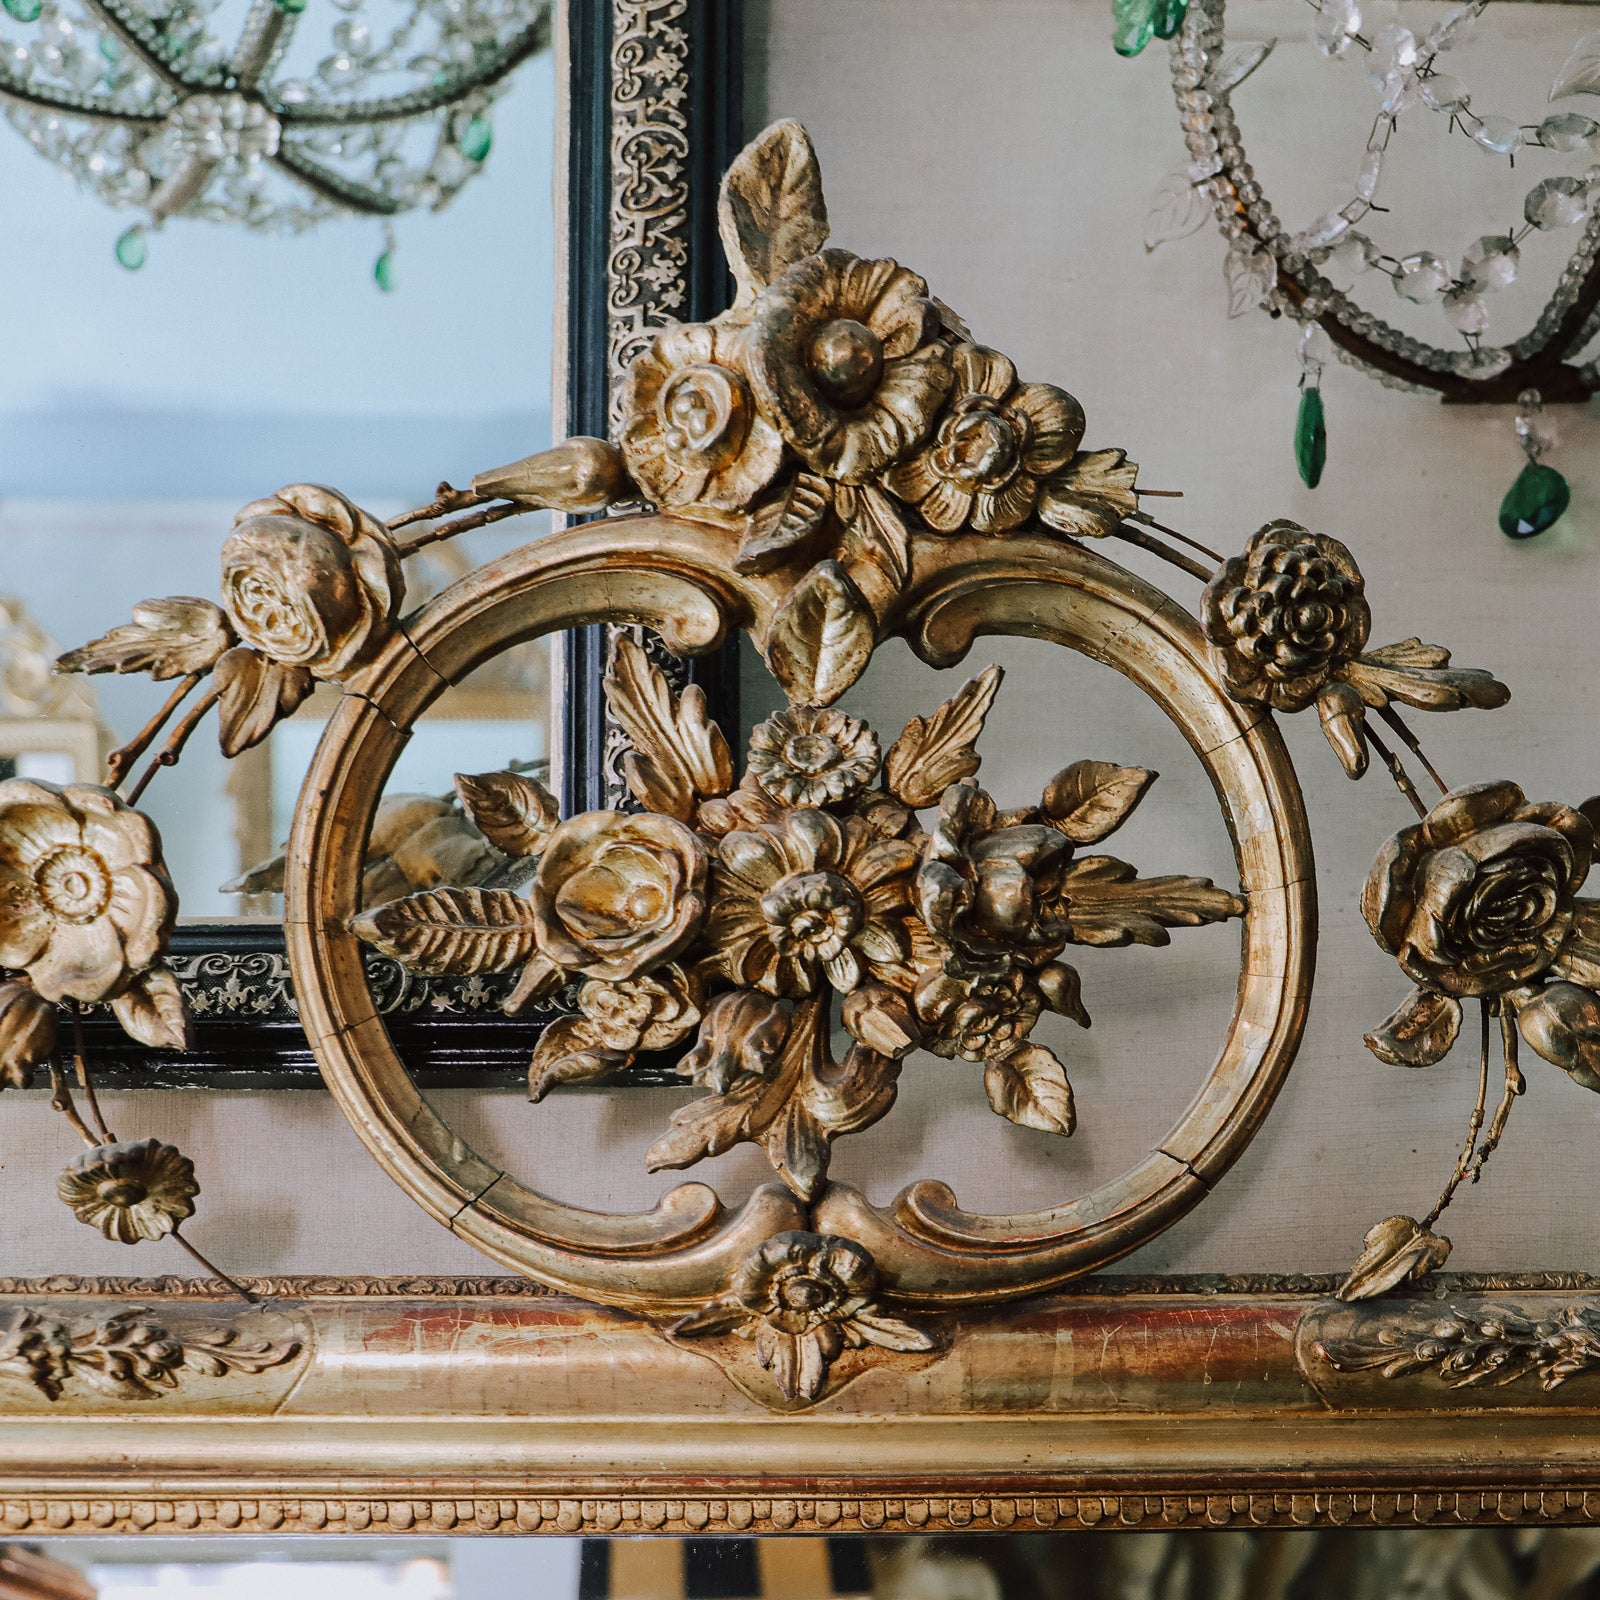 Large 19th C Louis Philippe Mirror with Ornate Flower Crest 